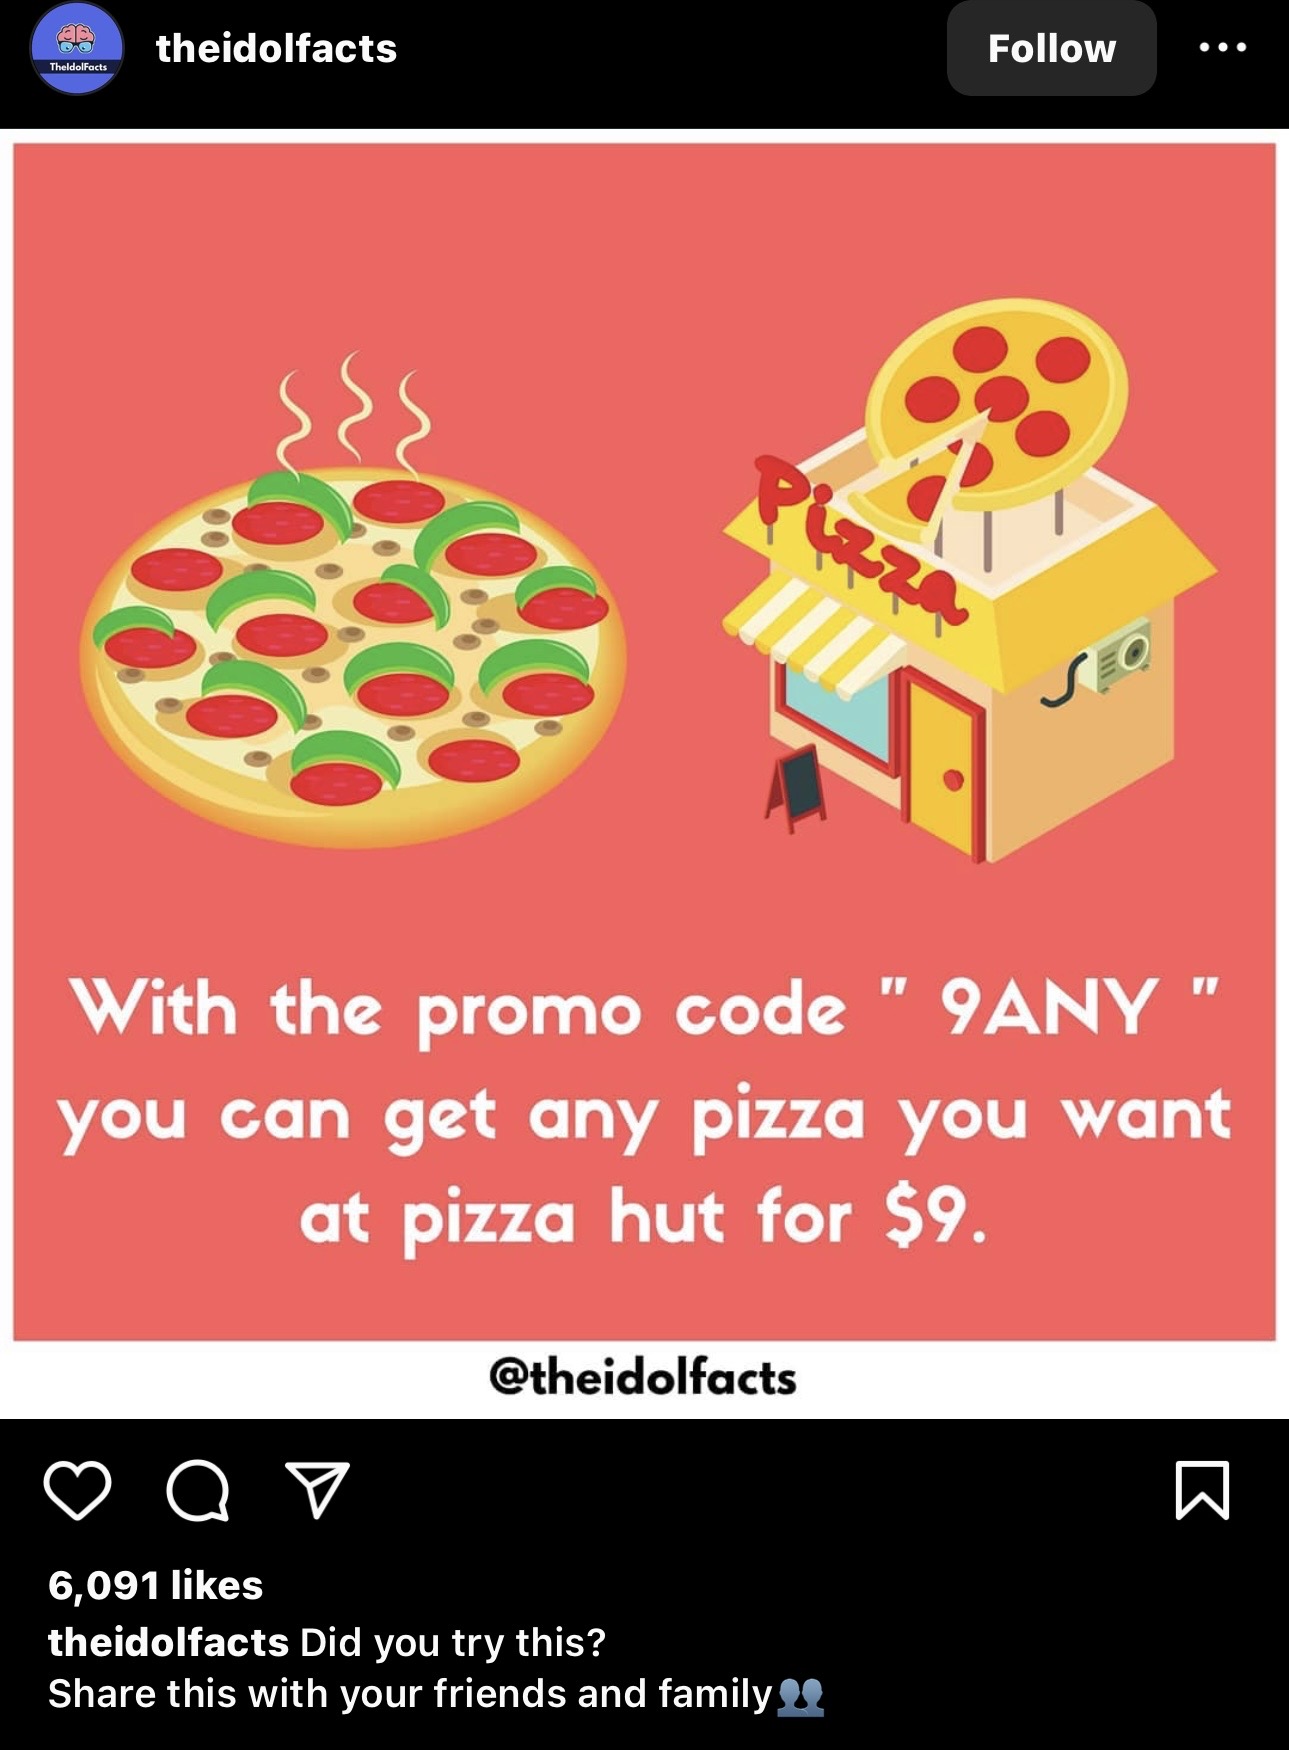 An image showing a promotional post on social media